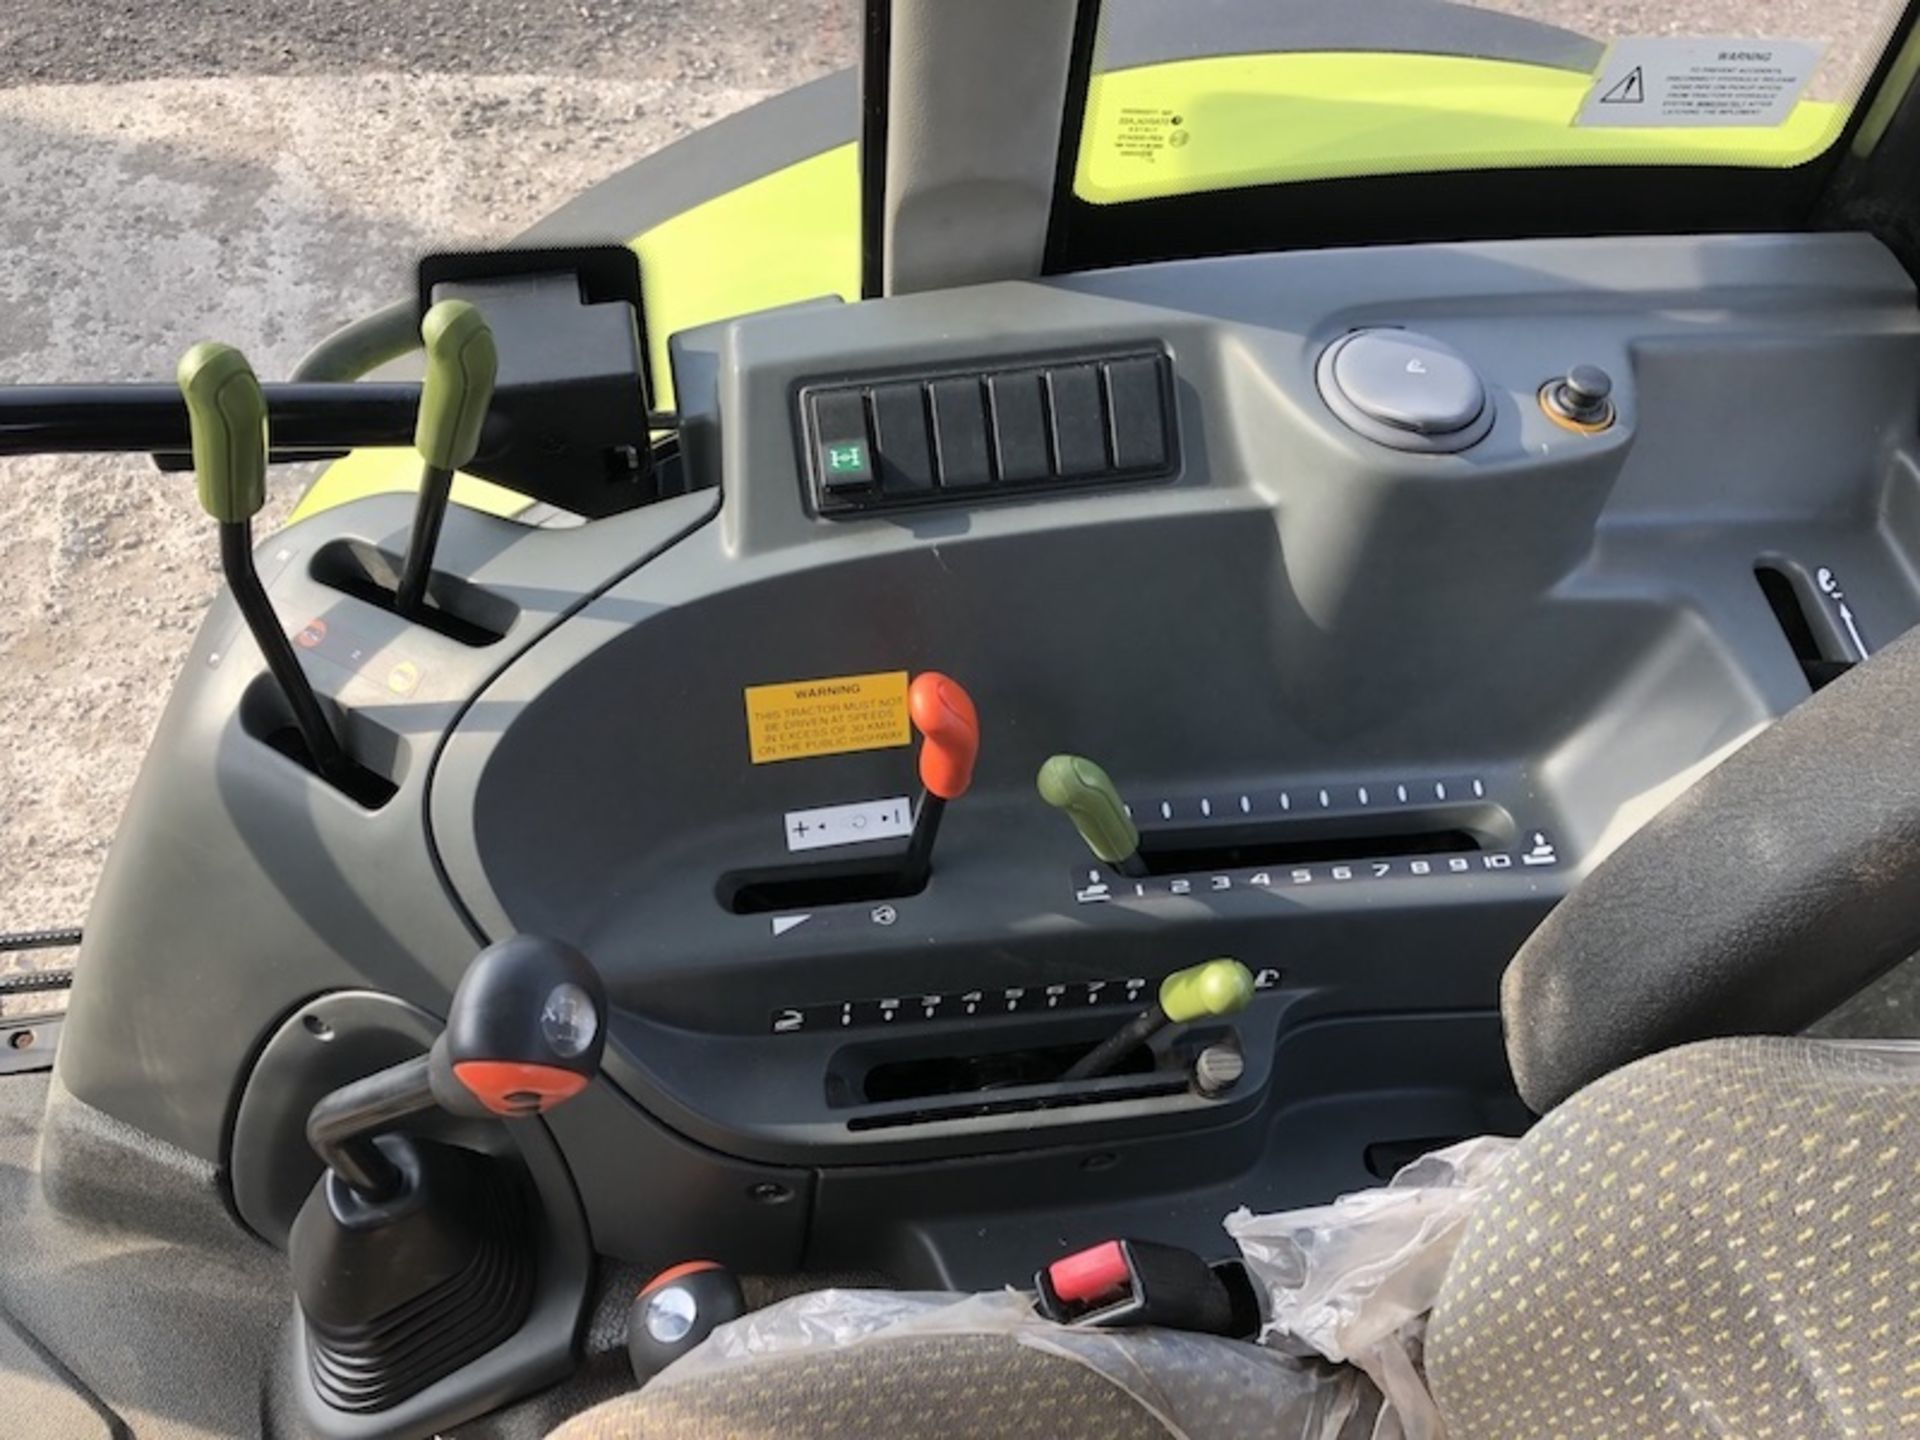 Claas Axos 340 Cx Tractor - Image 8 of 8